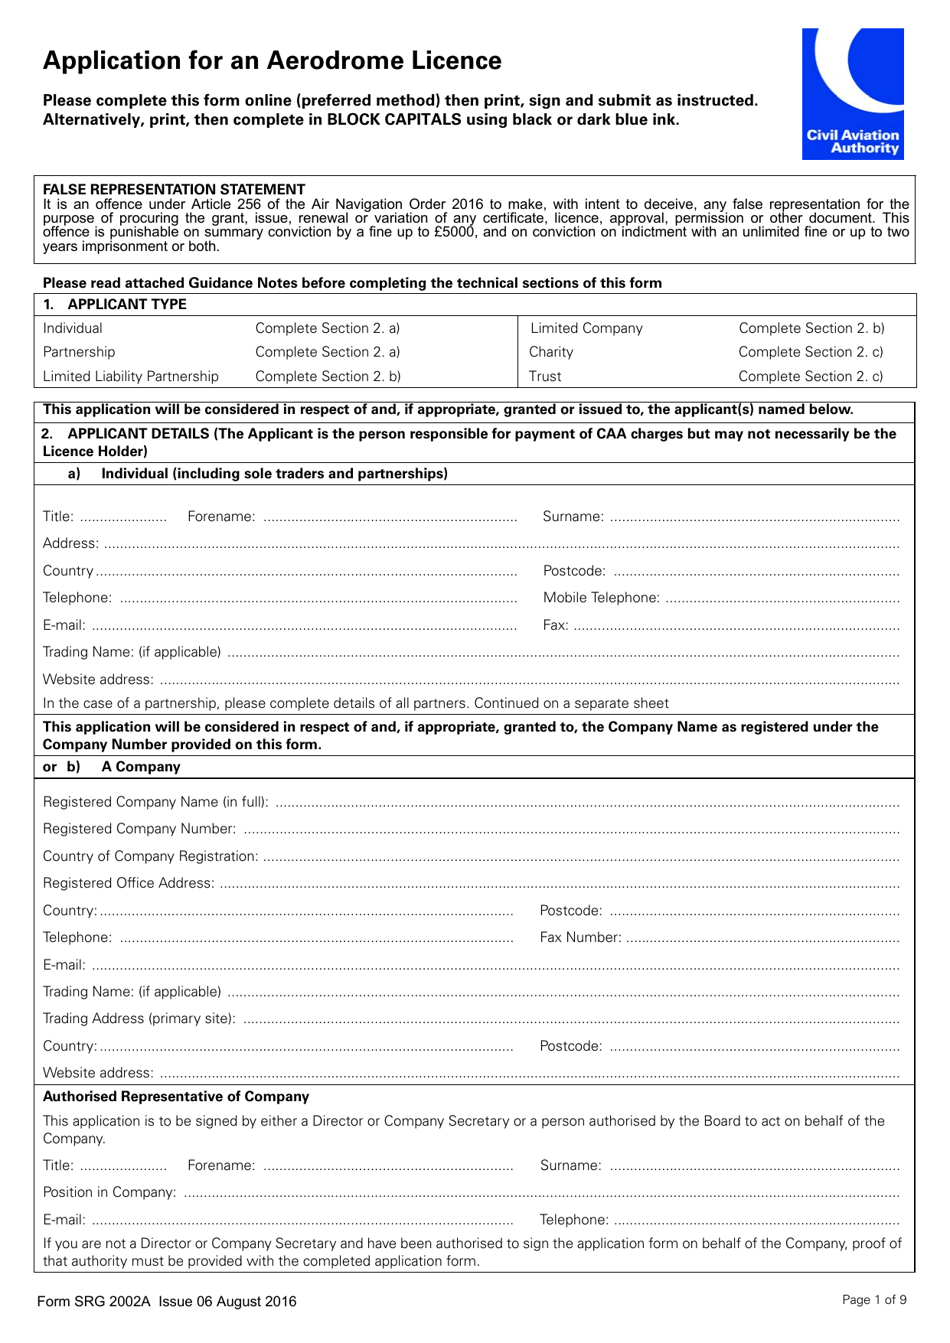 Form SRG2002A Application for an Aerodrome Licence - United Kingdom, Page 1